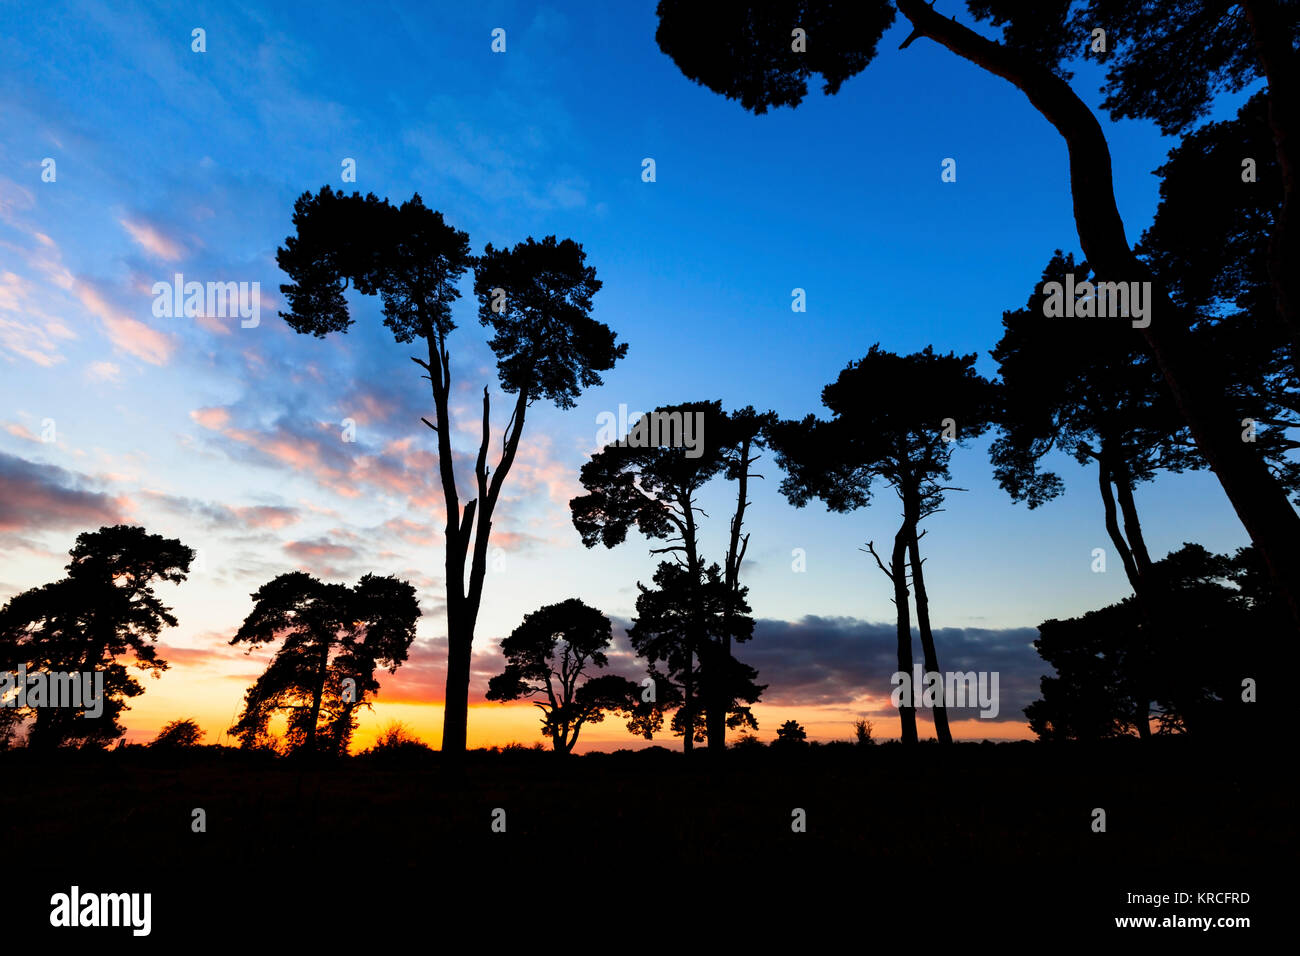 Silhouette of tall Scots pine trees at sunset Stock Photo